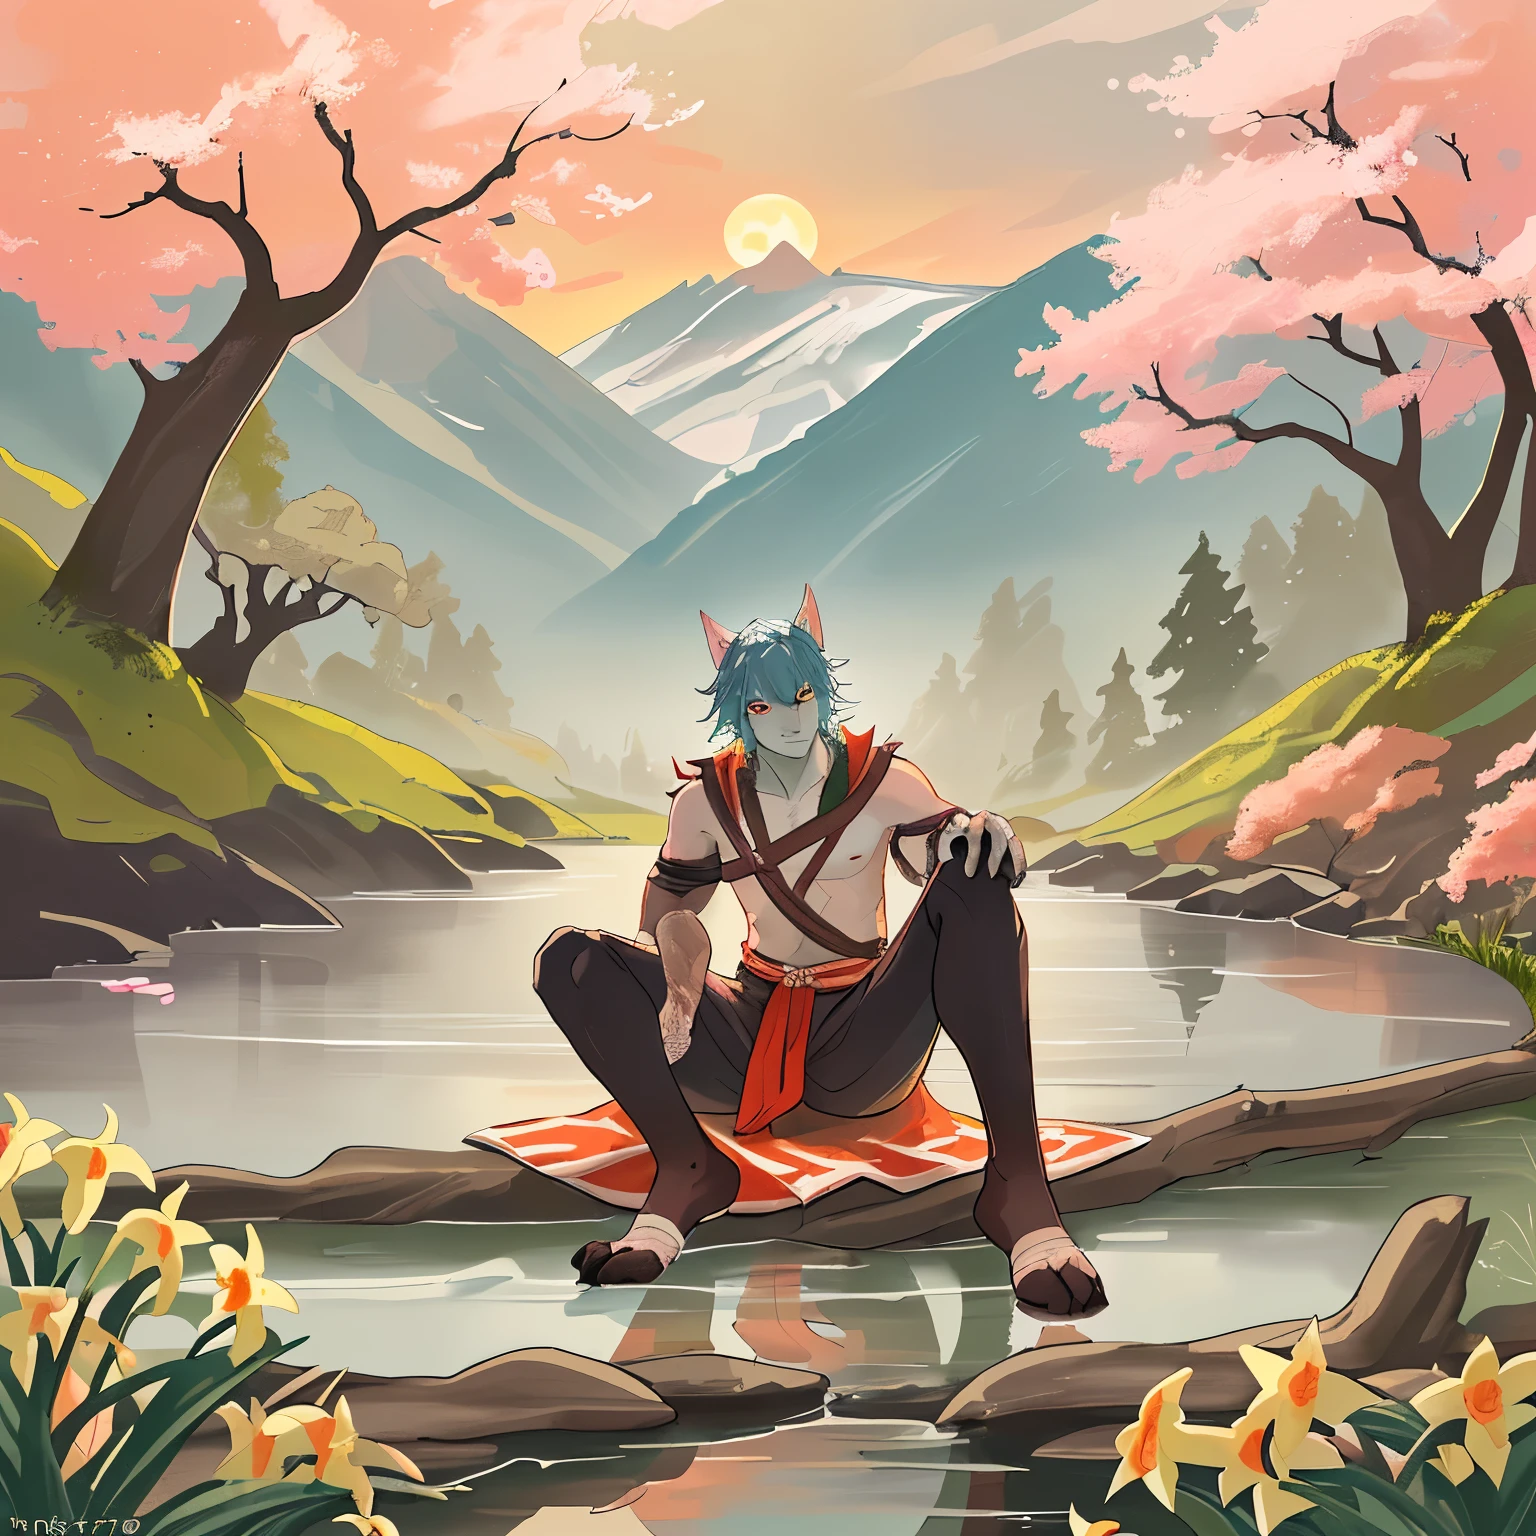 male orc，Wolf Boy，17 to 20 years old，side，Half-length photo，Ancient style clothing，Deep Forest, Distant Mountains, Bird. 2D style, Bright and vibrant, Cherry Blossoms, sunrise can be seen in the distance, The stream is winding, There are some daffodils on the shore, sunrise